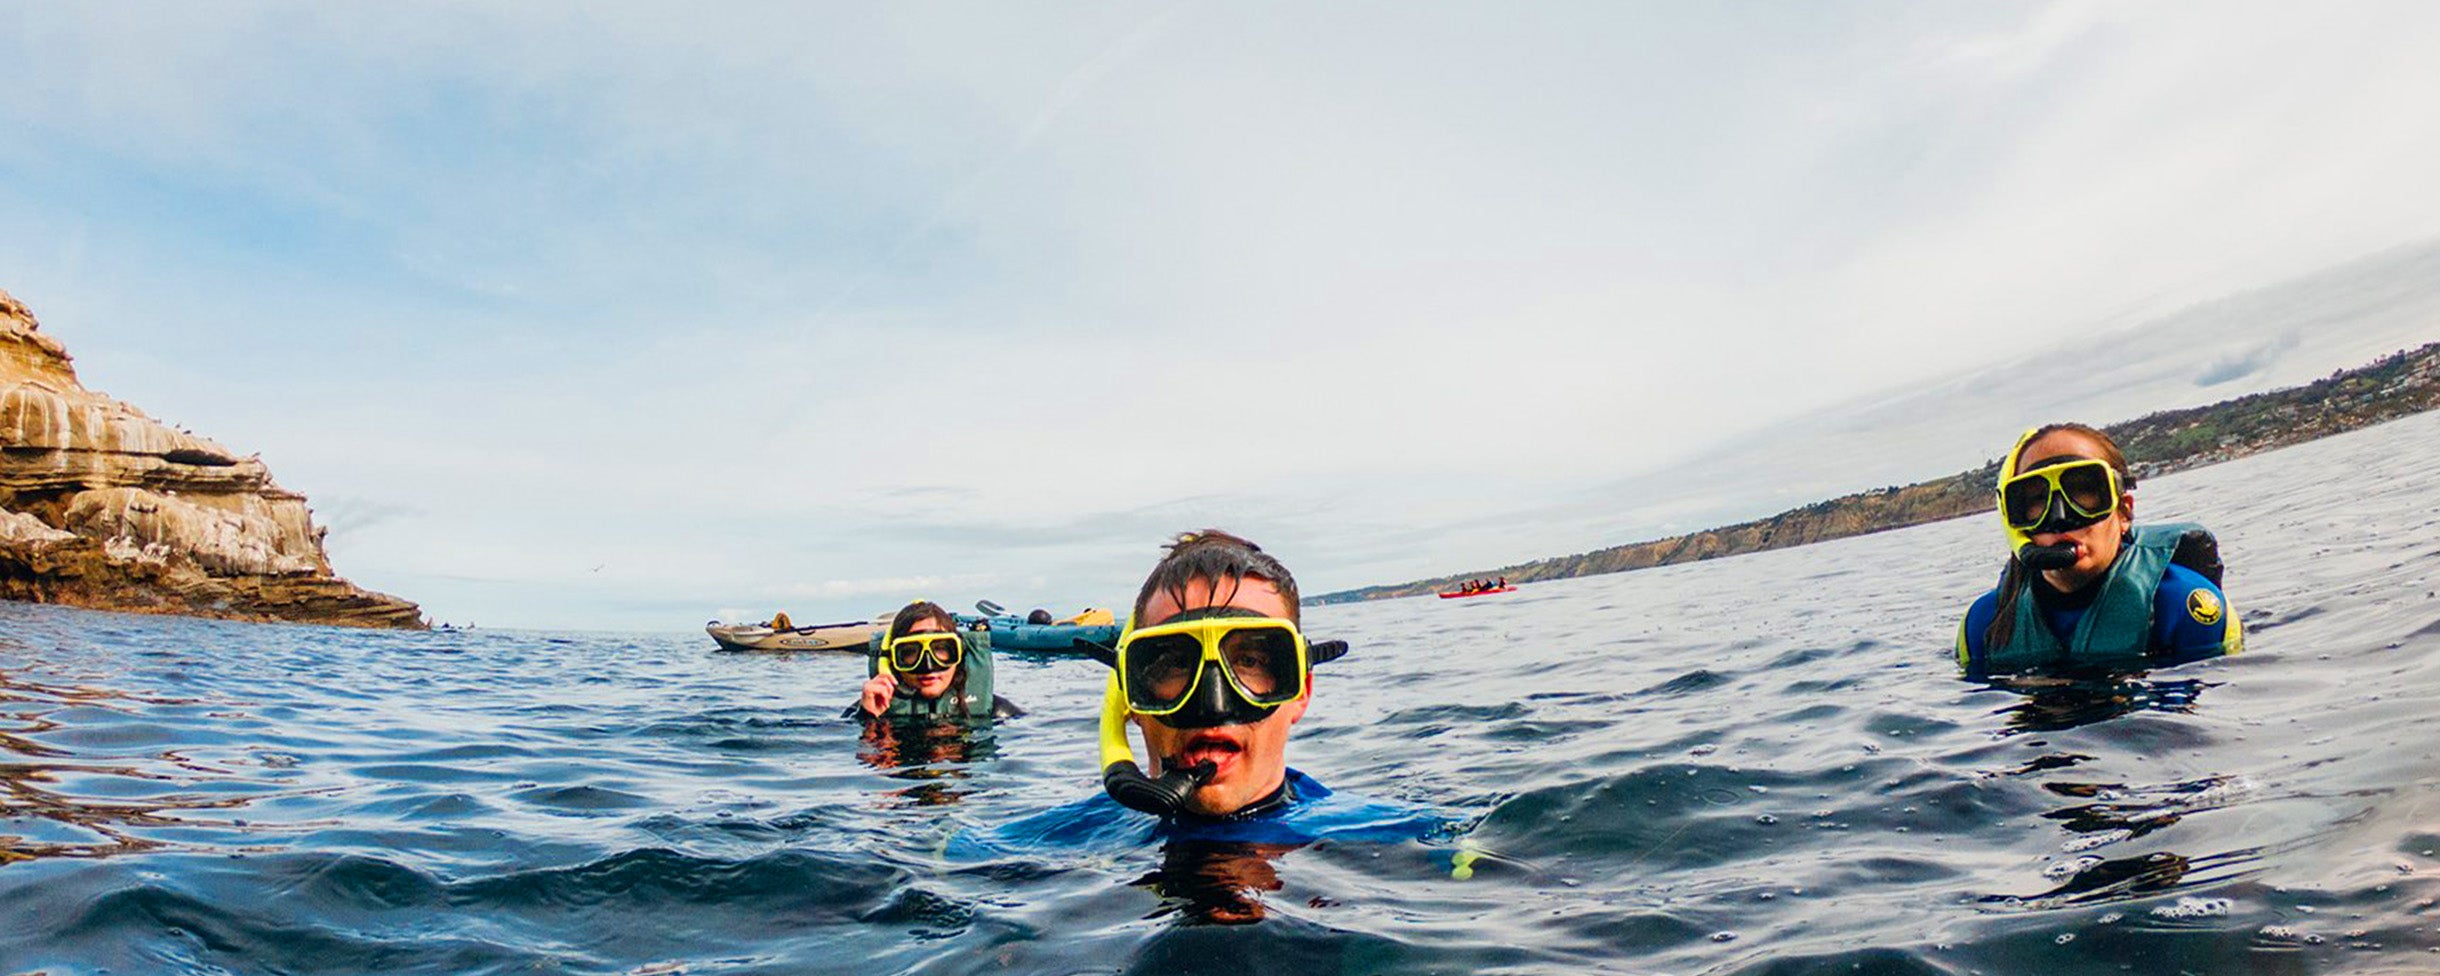 Tours - Snorkeling Tours available through Everyday California in La Jolla, California.